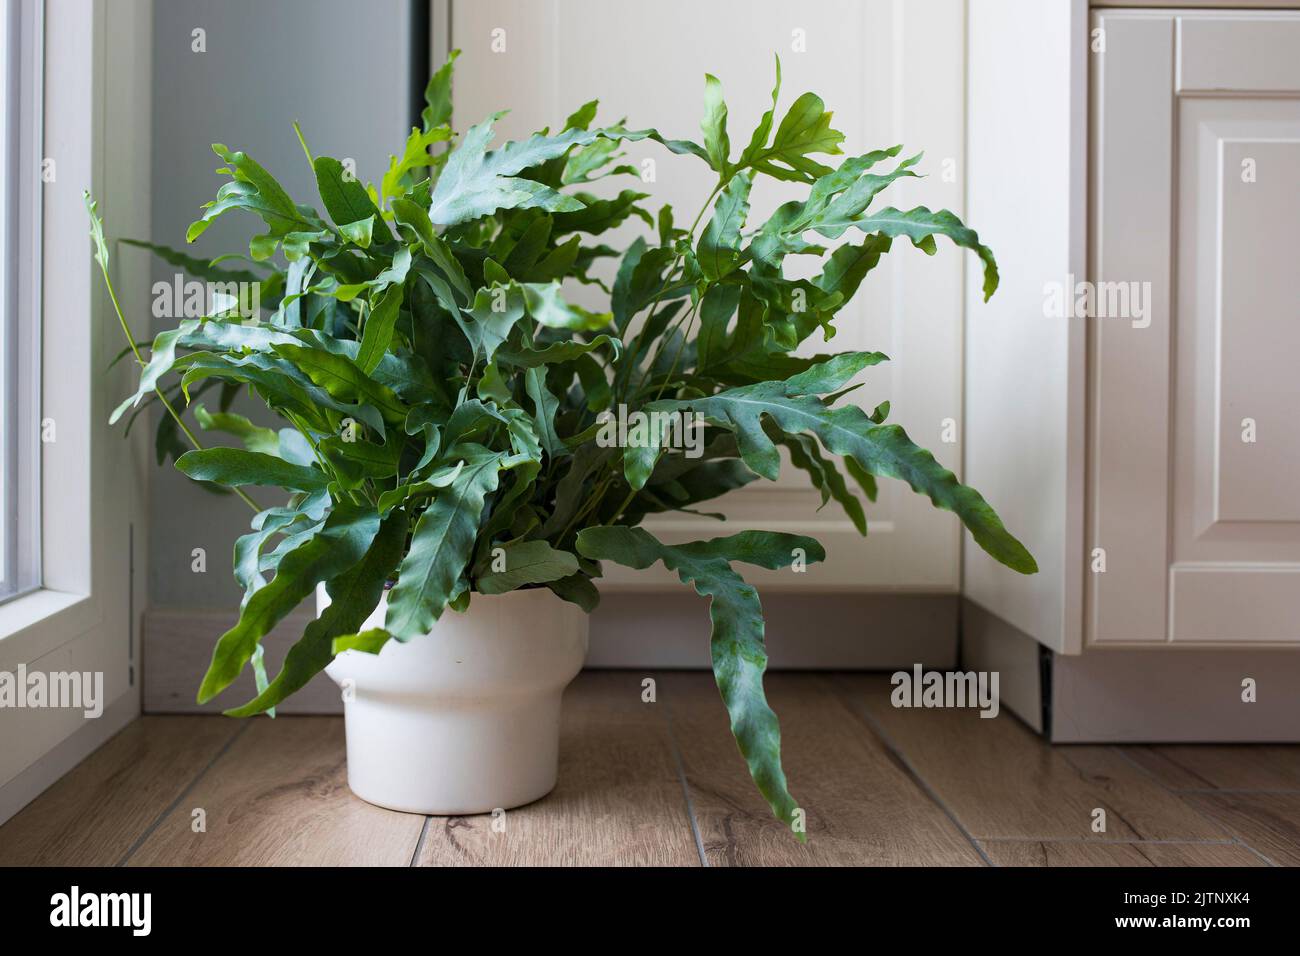 A plant of Blue Star fern (Phlebodium aureum), a fancy houseplant, on the floor in a house near a window. Stock Photo